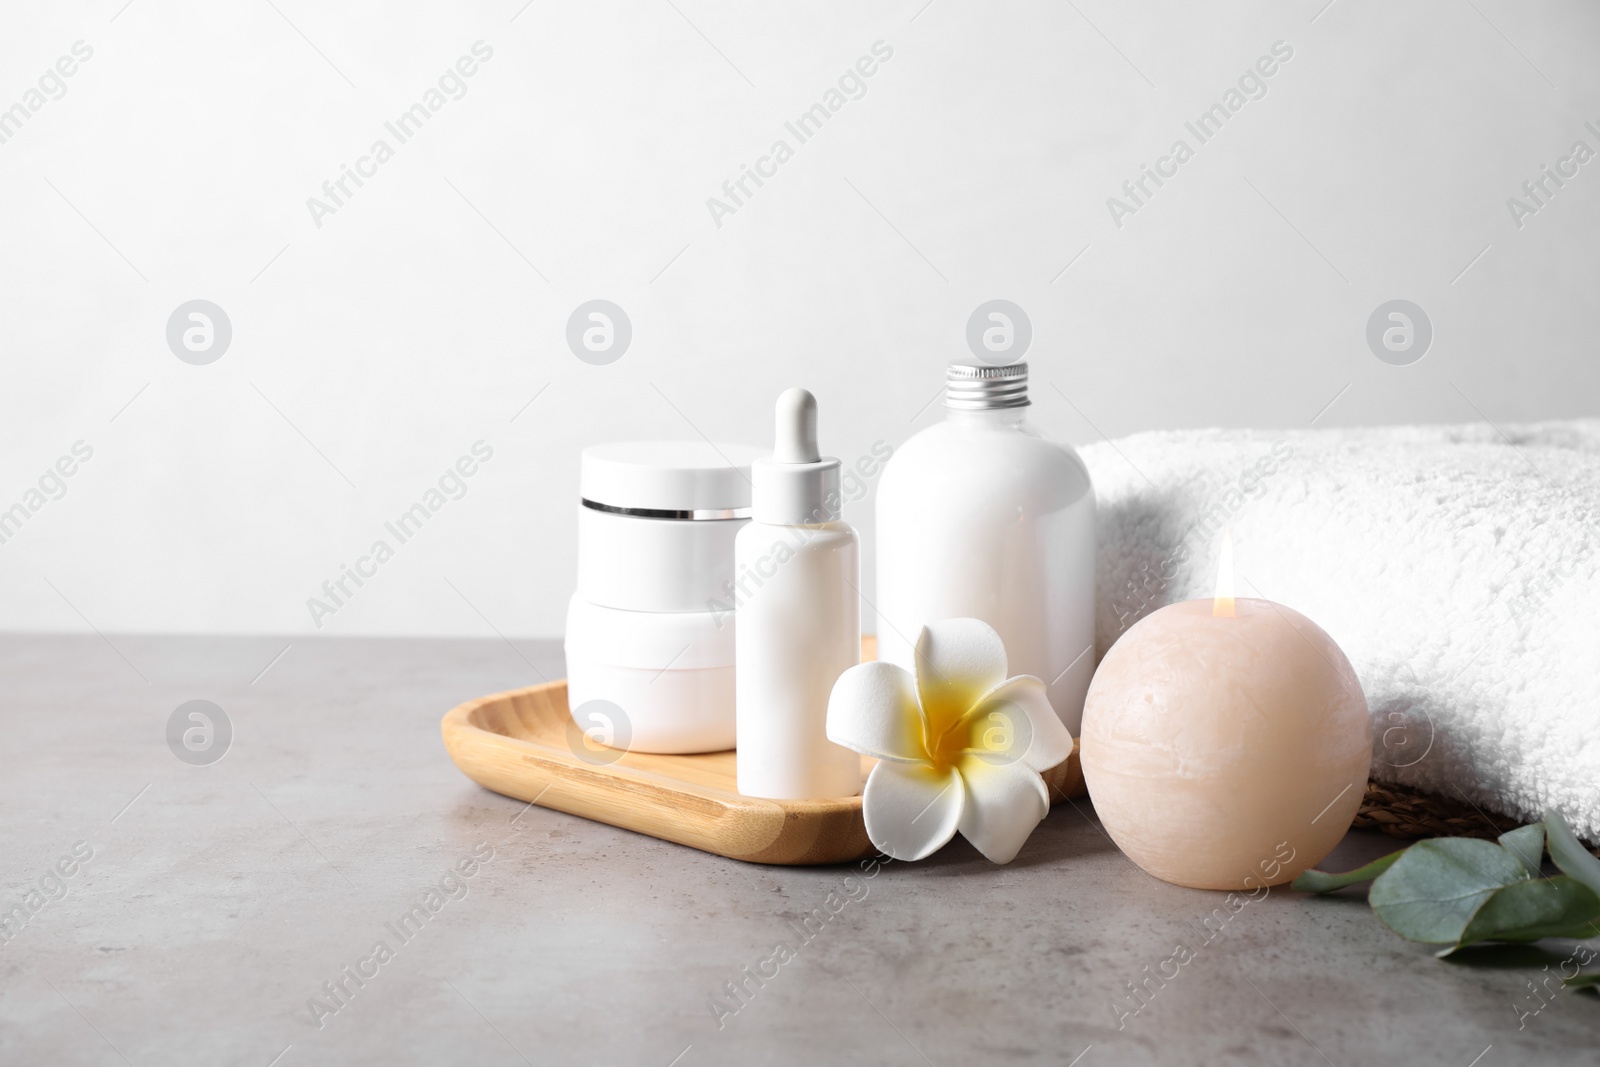 Photo of Towel, burning candle and bottles with cosmetic products on grey table